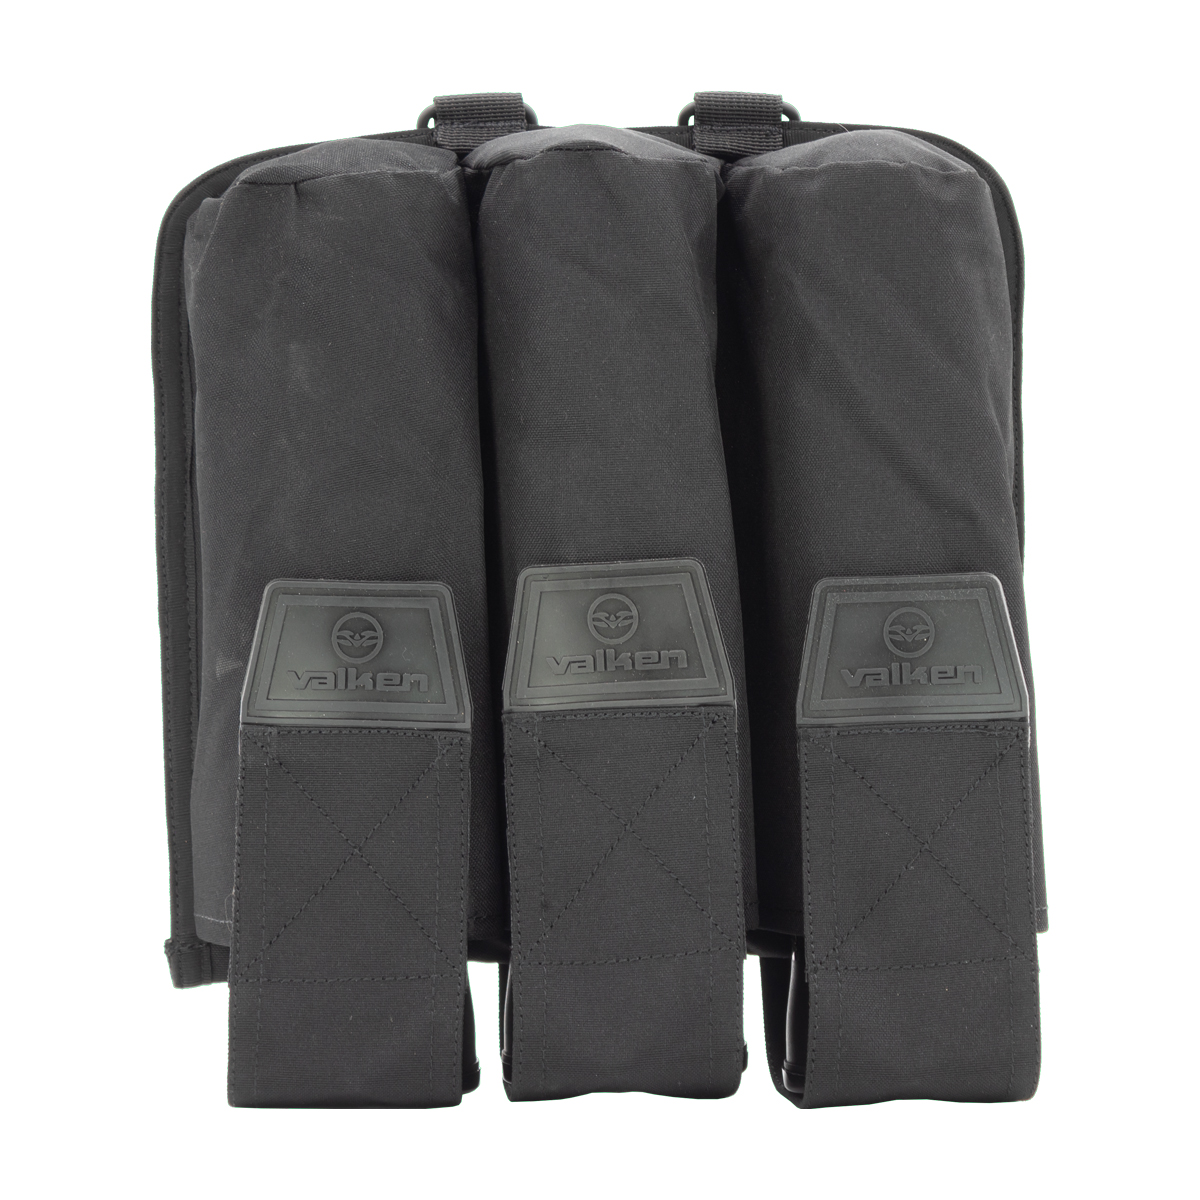 MOLLE Fishing Pouches!